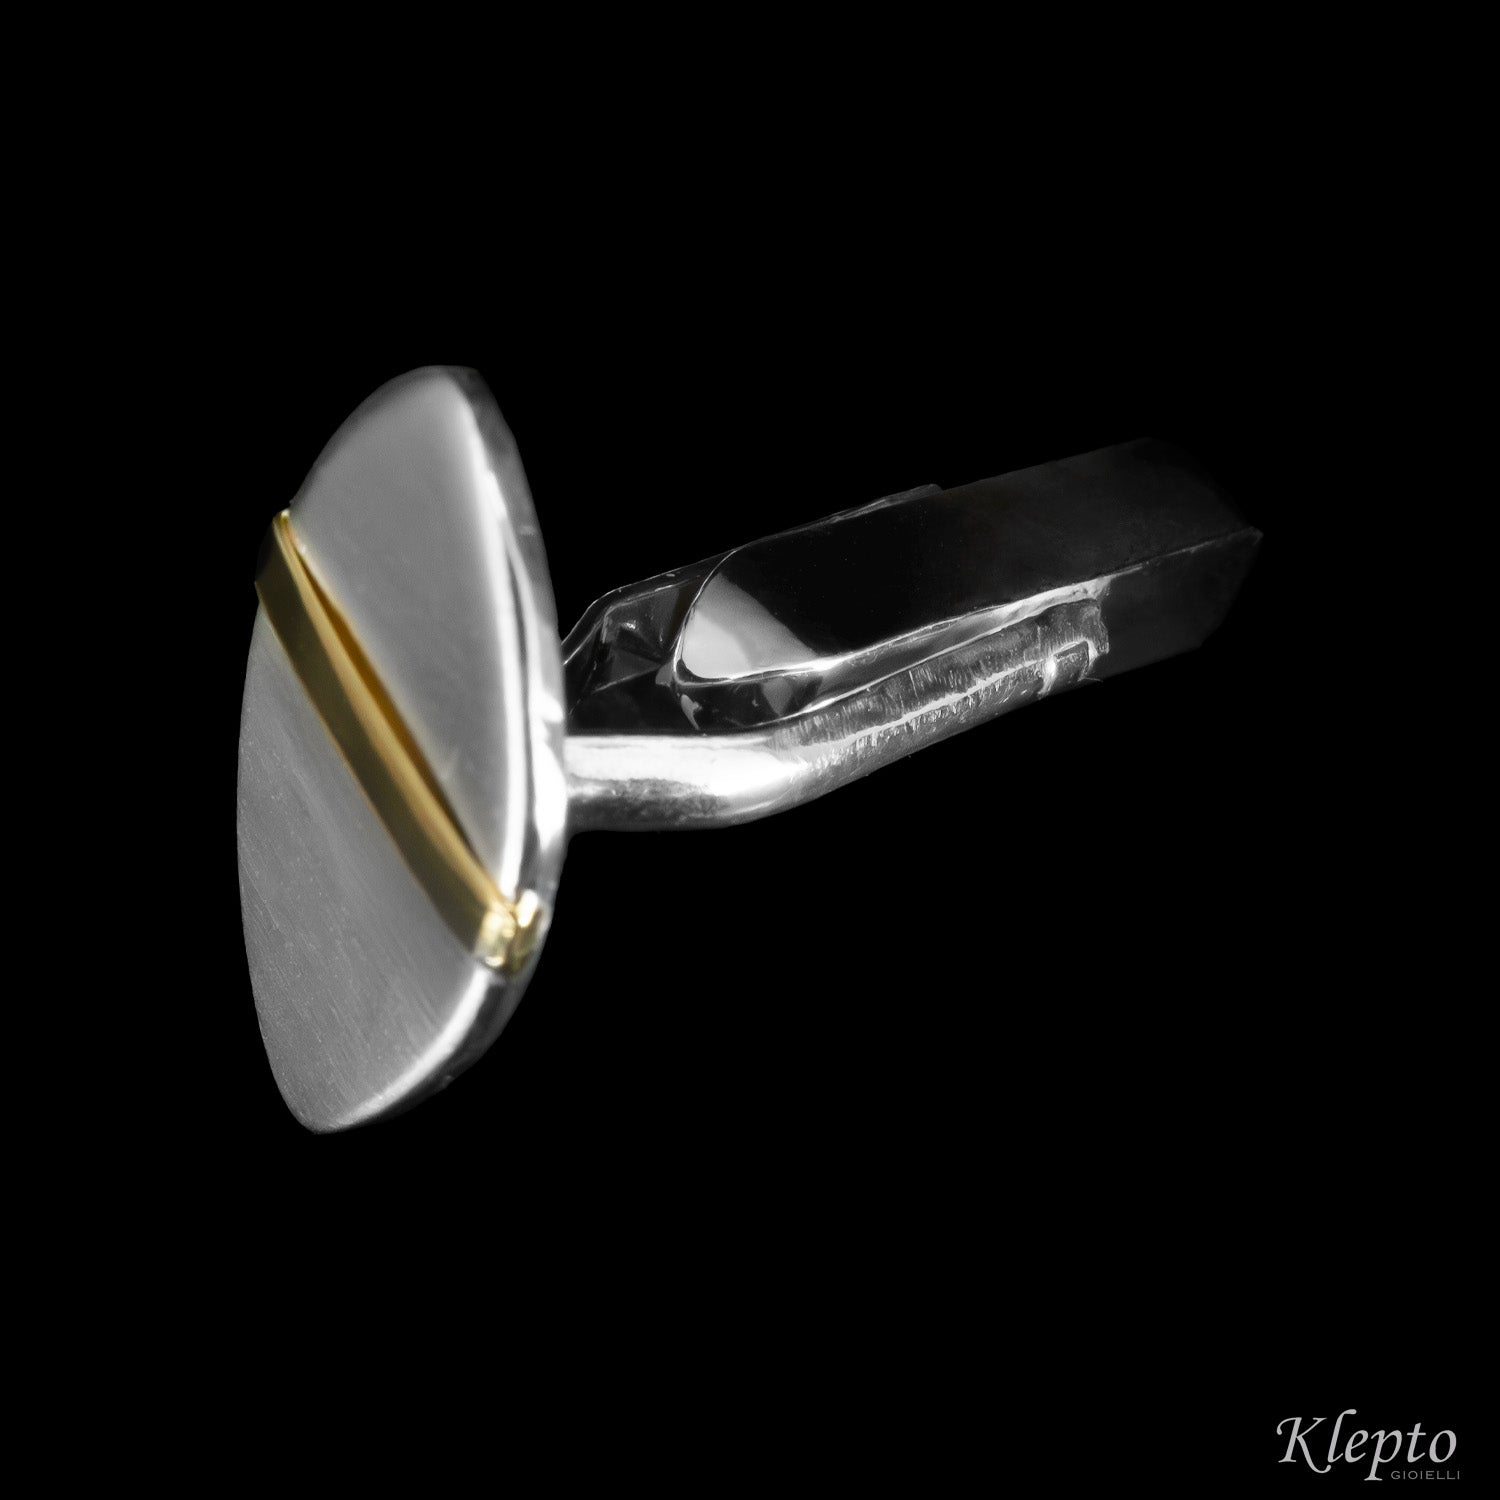 Cufflinks in Silnova® Silver and yellow gold details